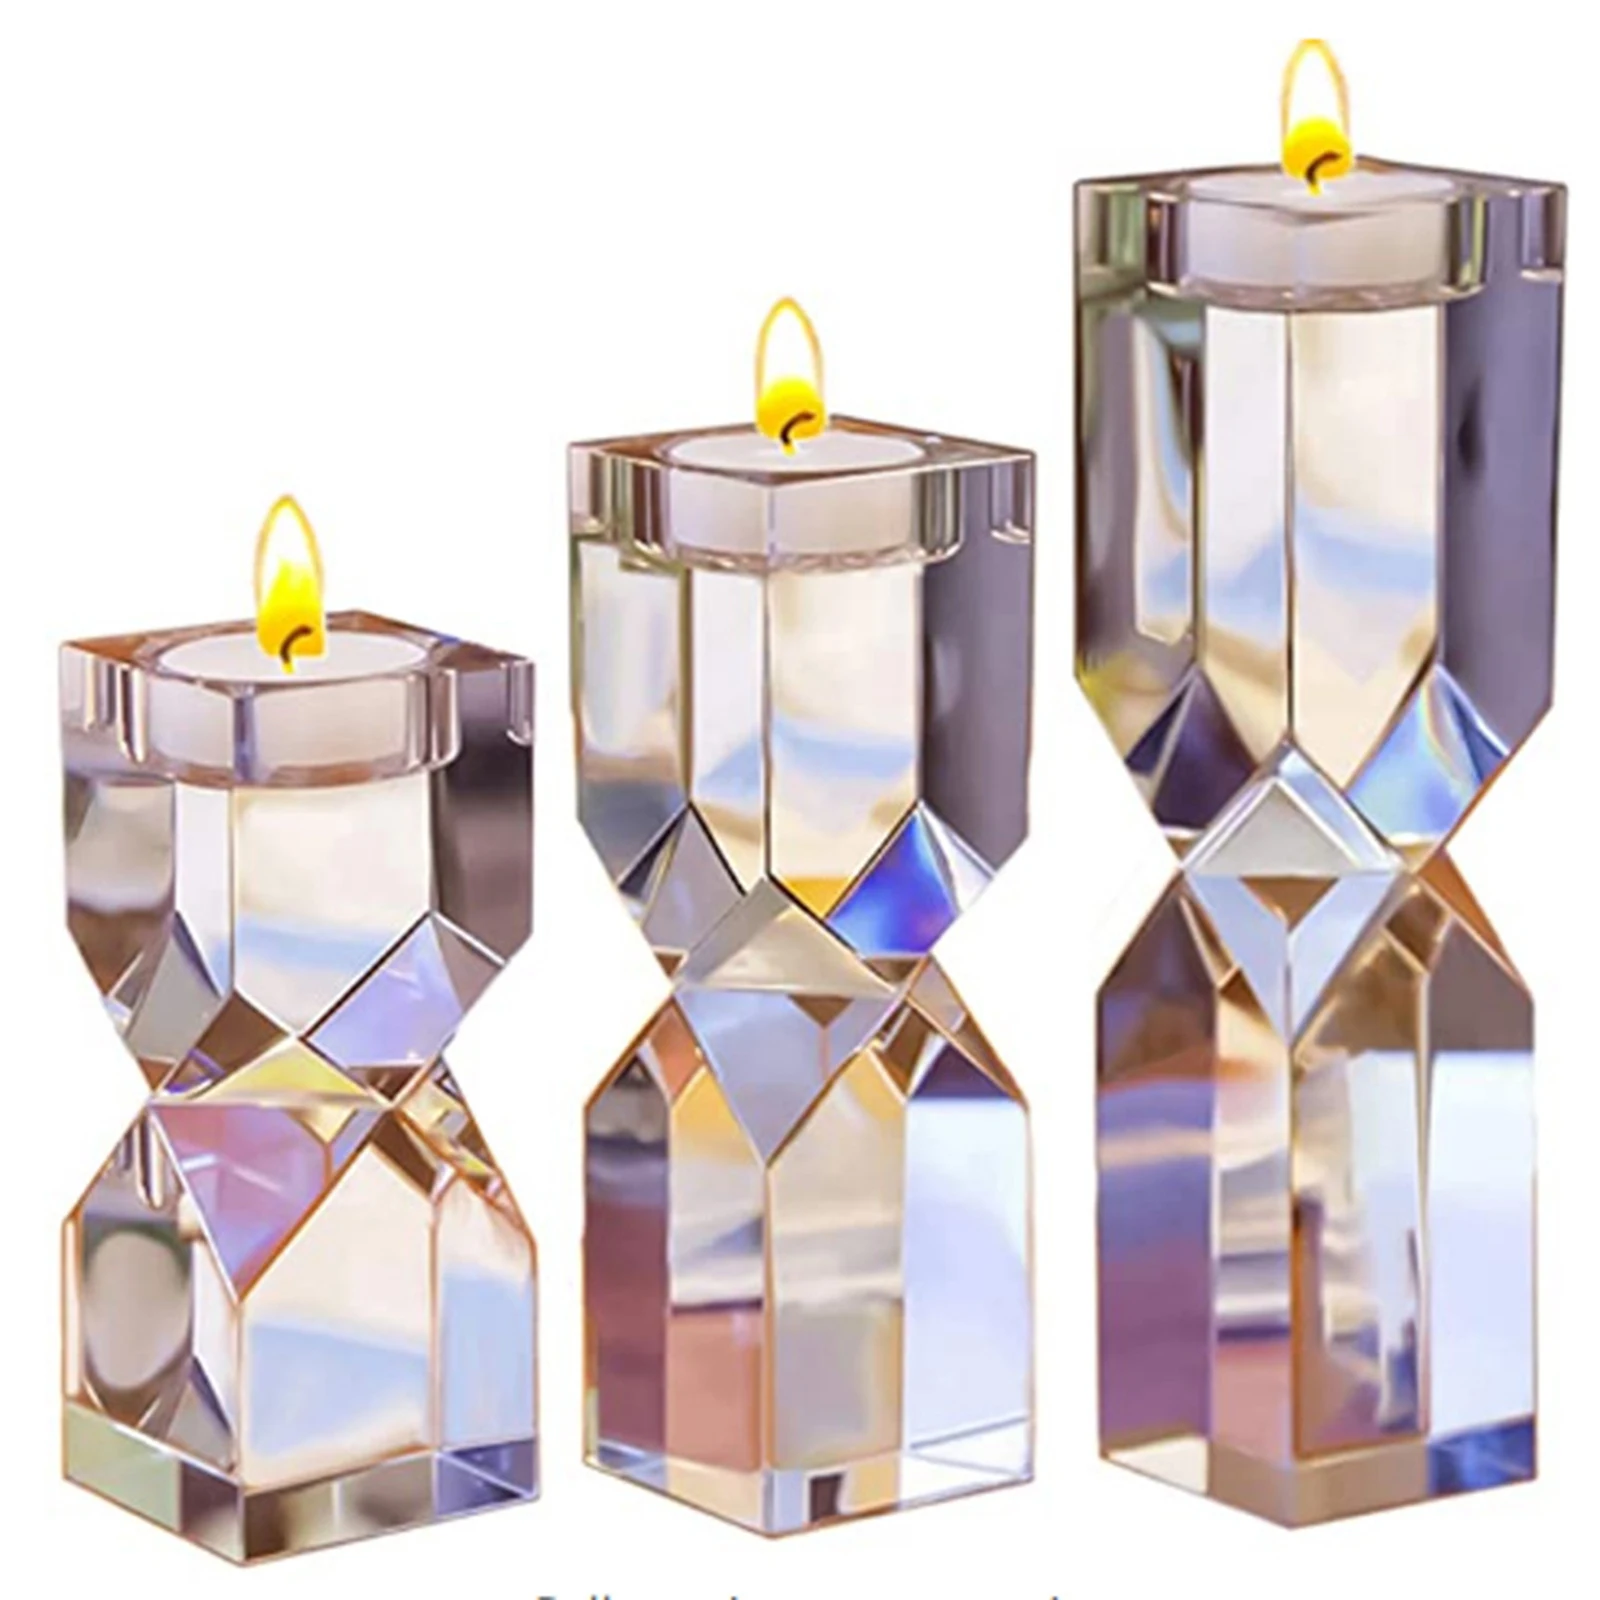 3X Crystal Vases Tea Light Candles Holder Glass Stand Home Wedding Party Decor U 